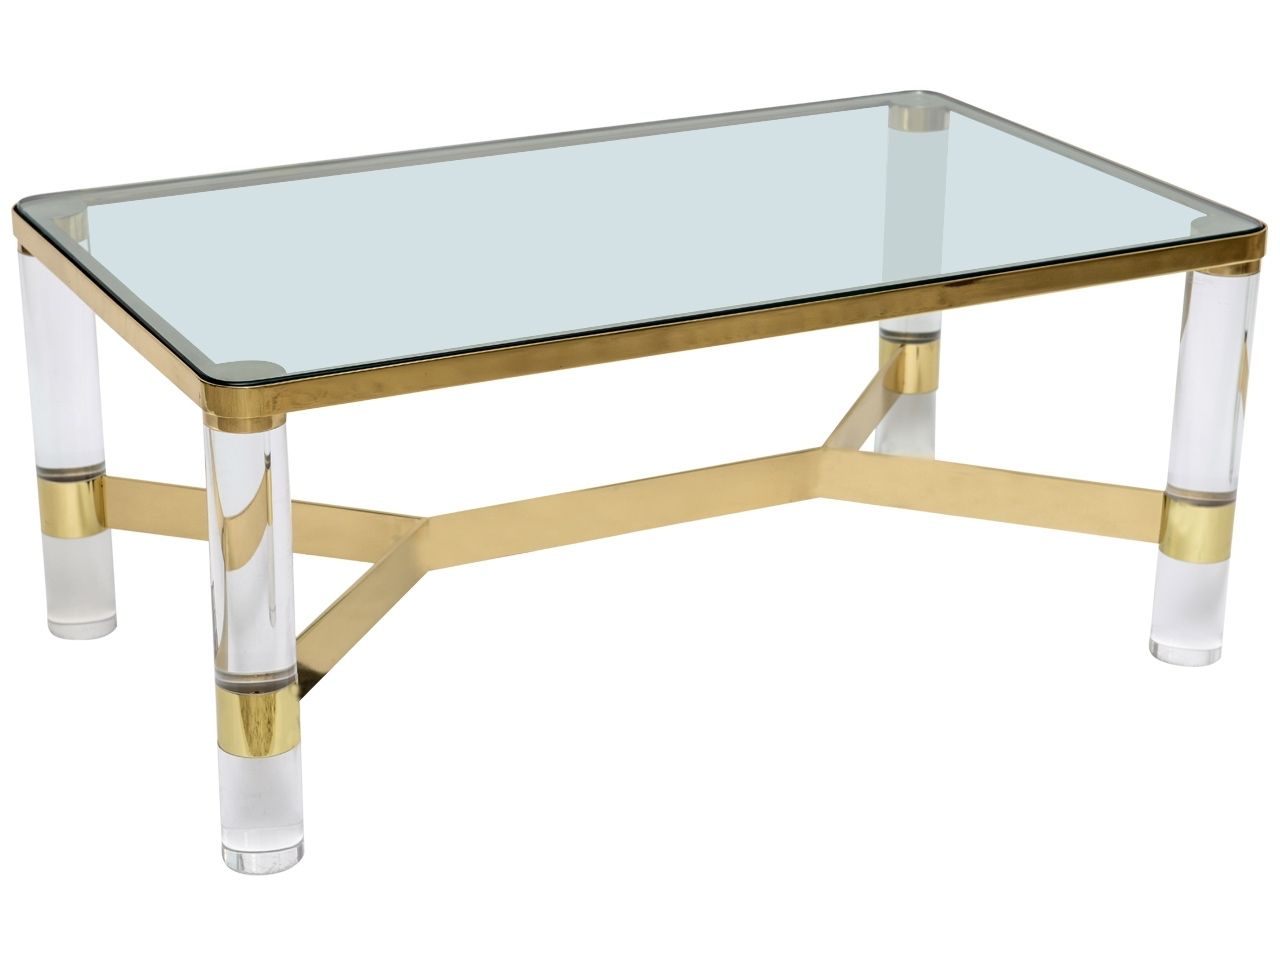 Choosing Acrylic Coffee Table | Boundless Table Ideas Inside Modern Acrylic Coffee Tables (View 27 of 30)